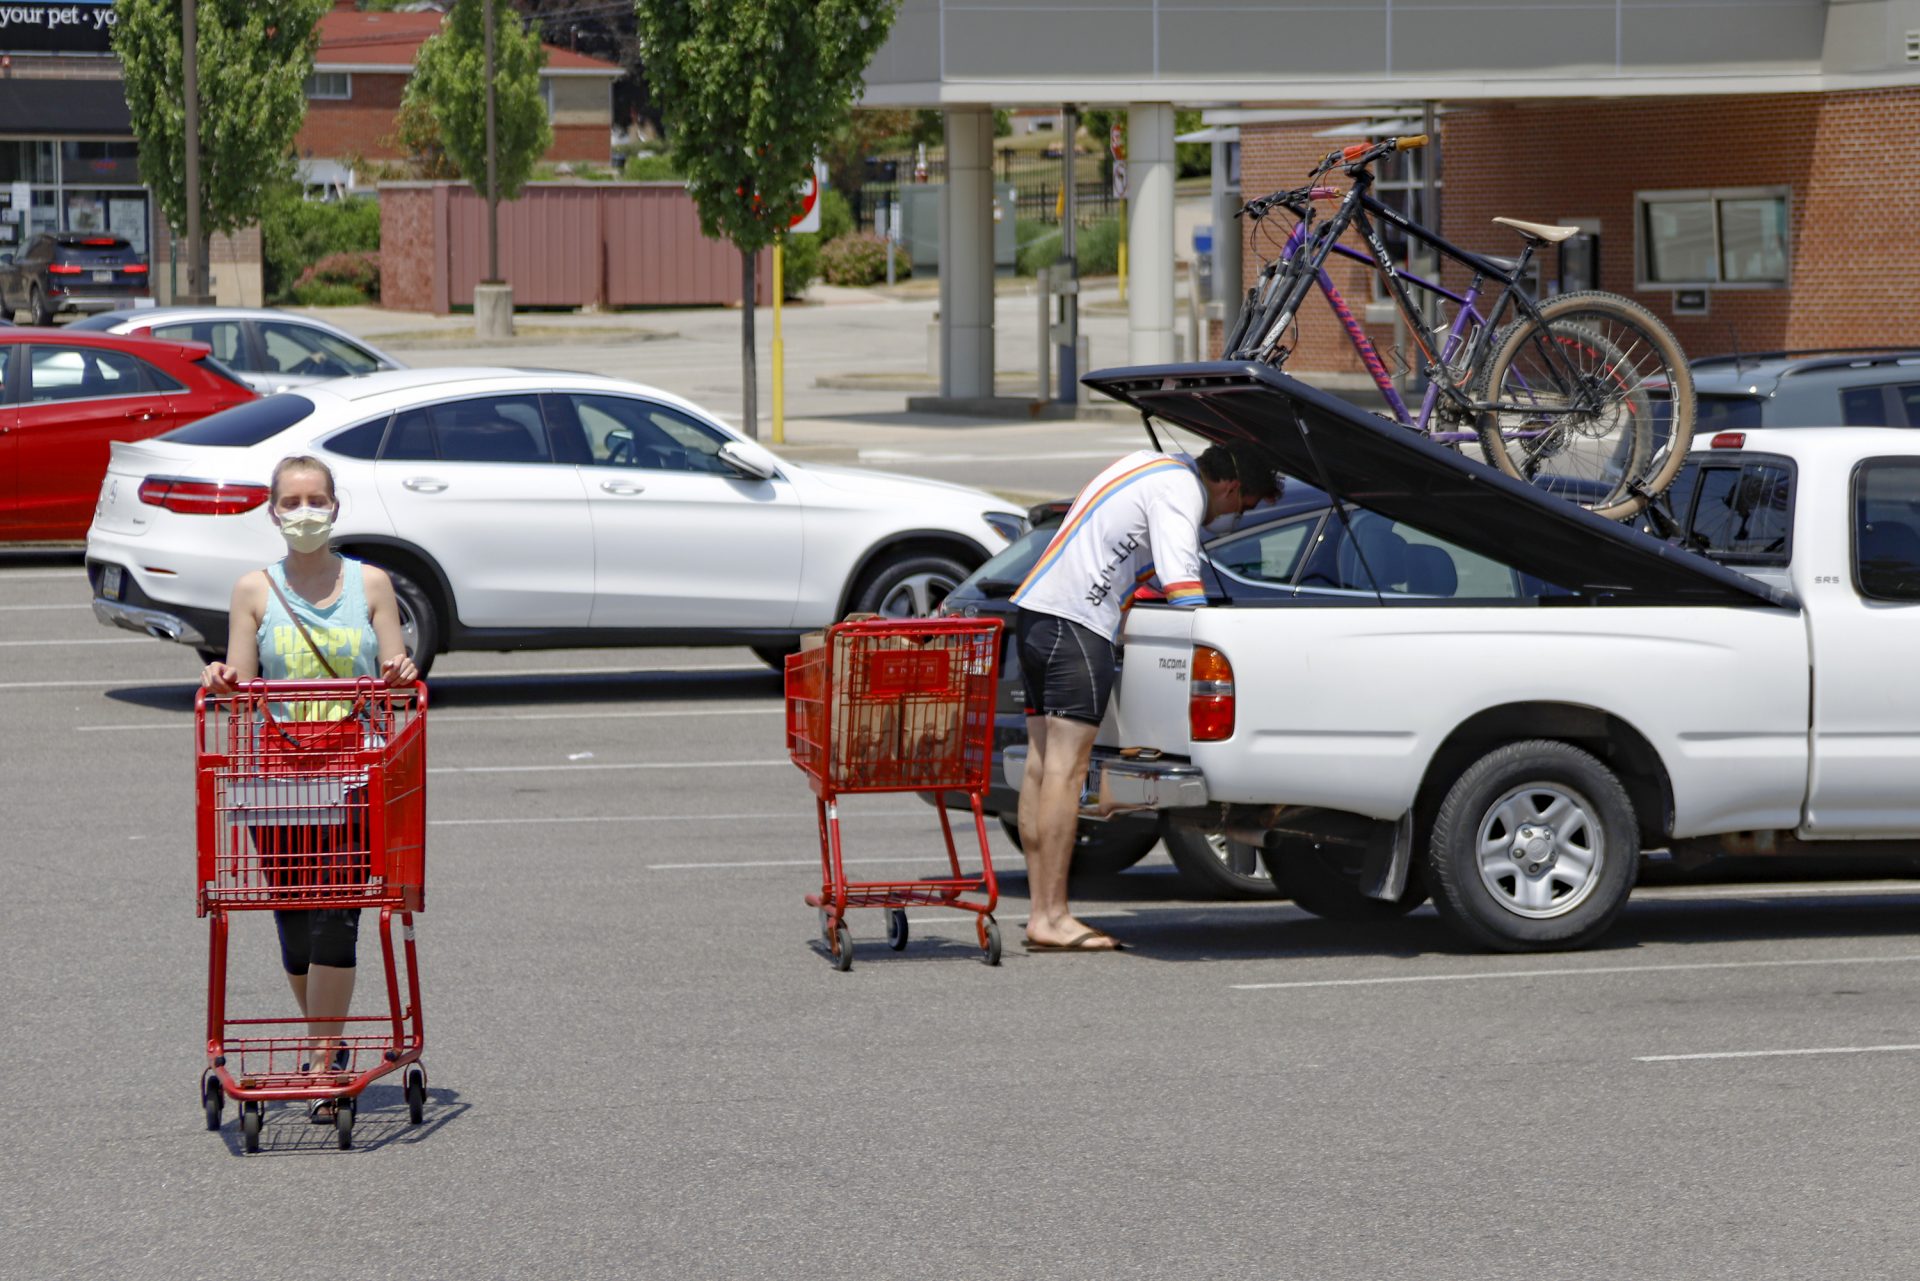 A woman and man wear COVID-19 protective masks as she pushes her shopping cart and a man loads his truck in a parking lot, Friday, July 3, 2020, in McCandless, Pa. Gov. Tom Wolf's more expansive mask order issued this week as the coronavirus shows new signs of life in Pennsylvania and the July Fourth holiday starts has been met with hostility from Republicans objecting to the Democrat's use of power or even to wearing a mask itself.